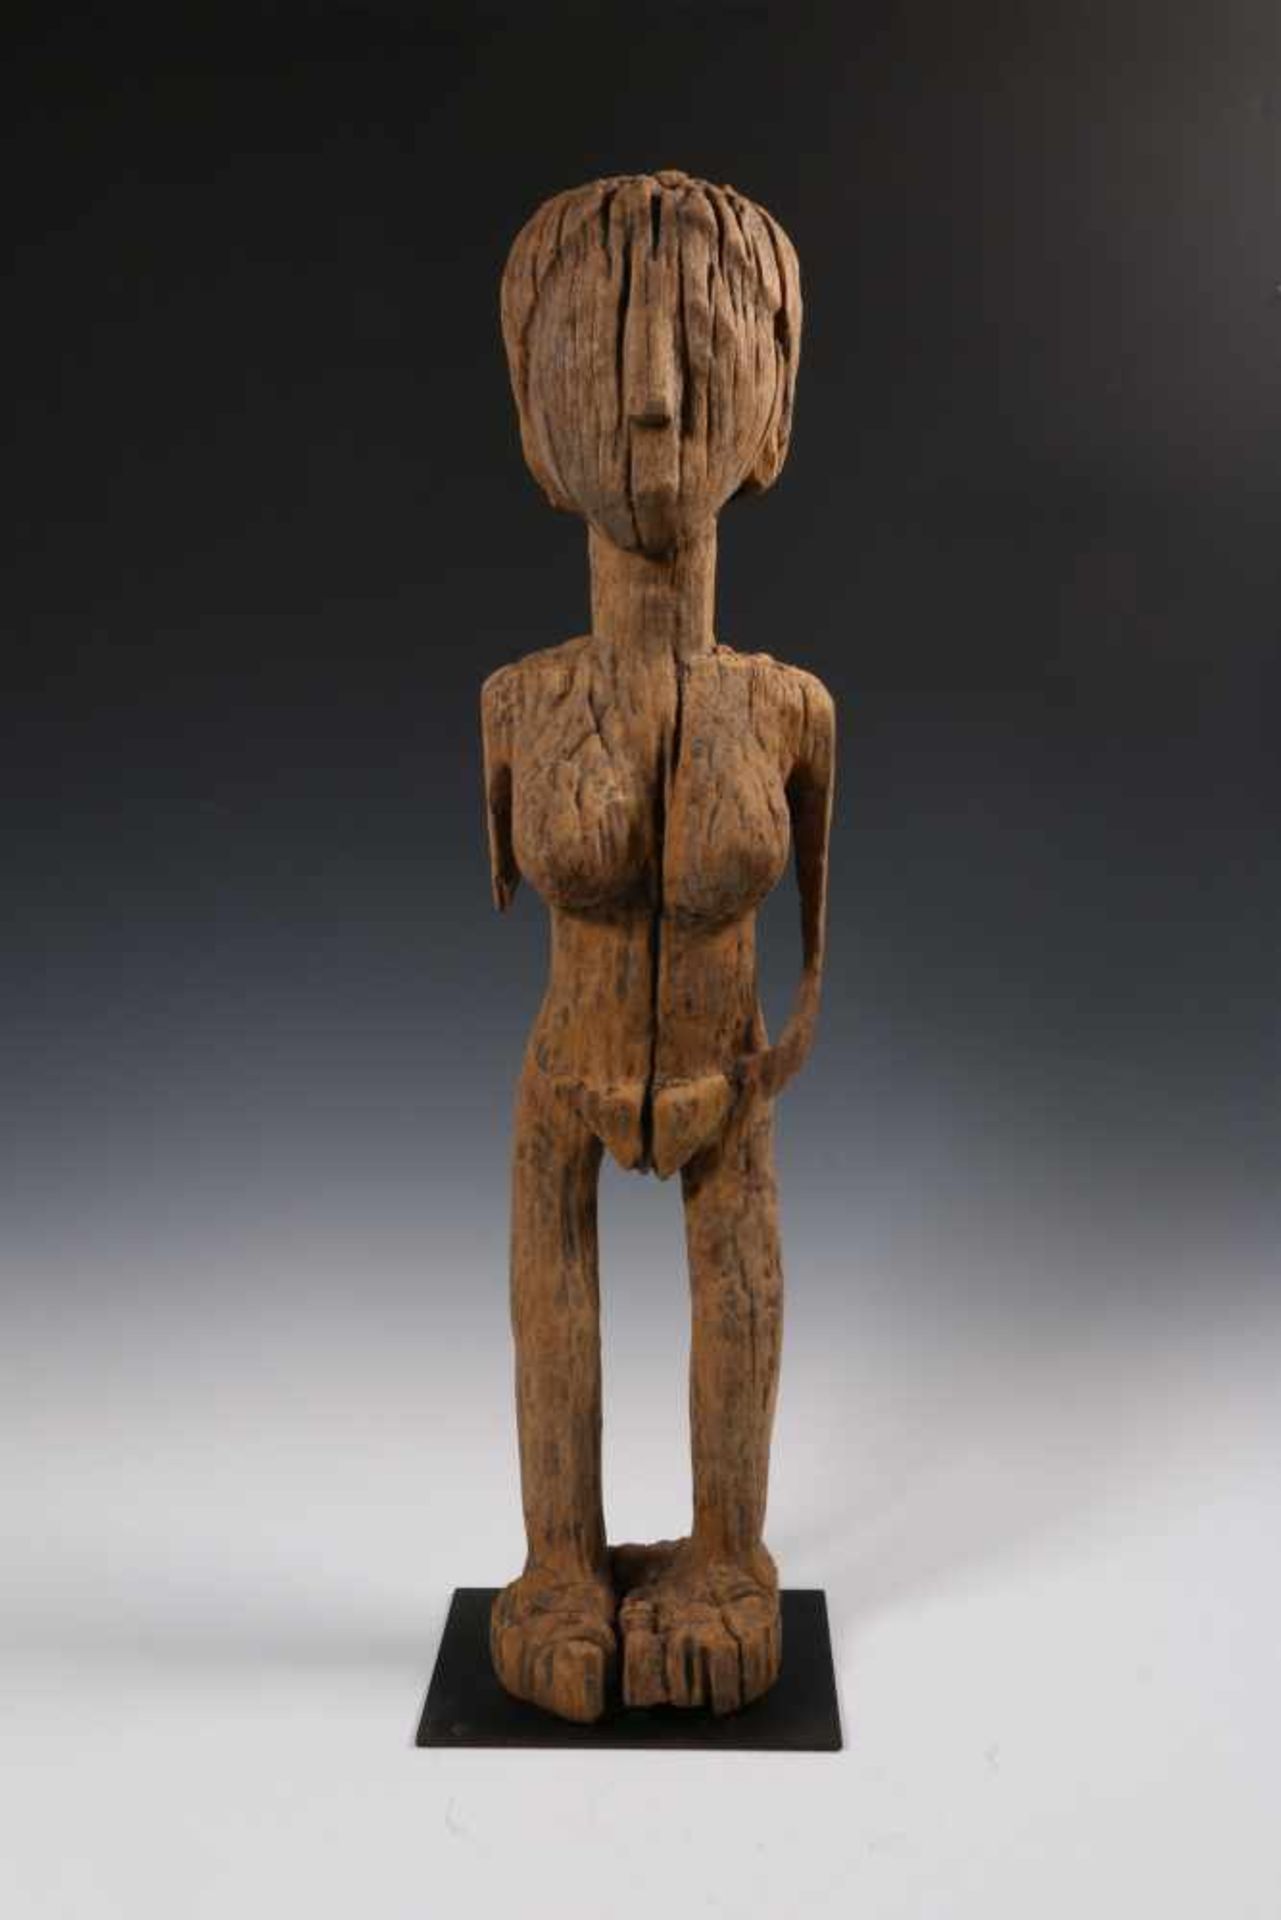 Madagascar, Vezo, camphor wooden grave figurein the form of a standing female figure. Bought in